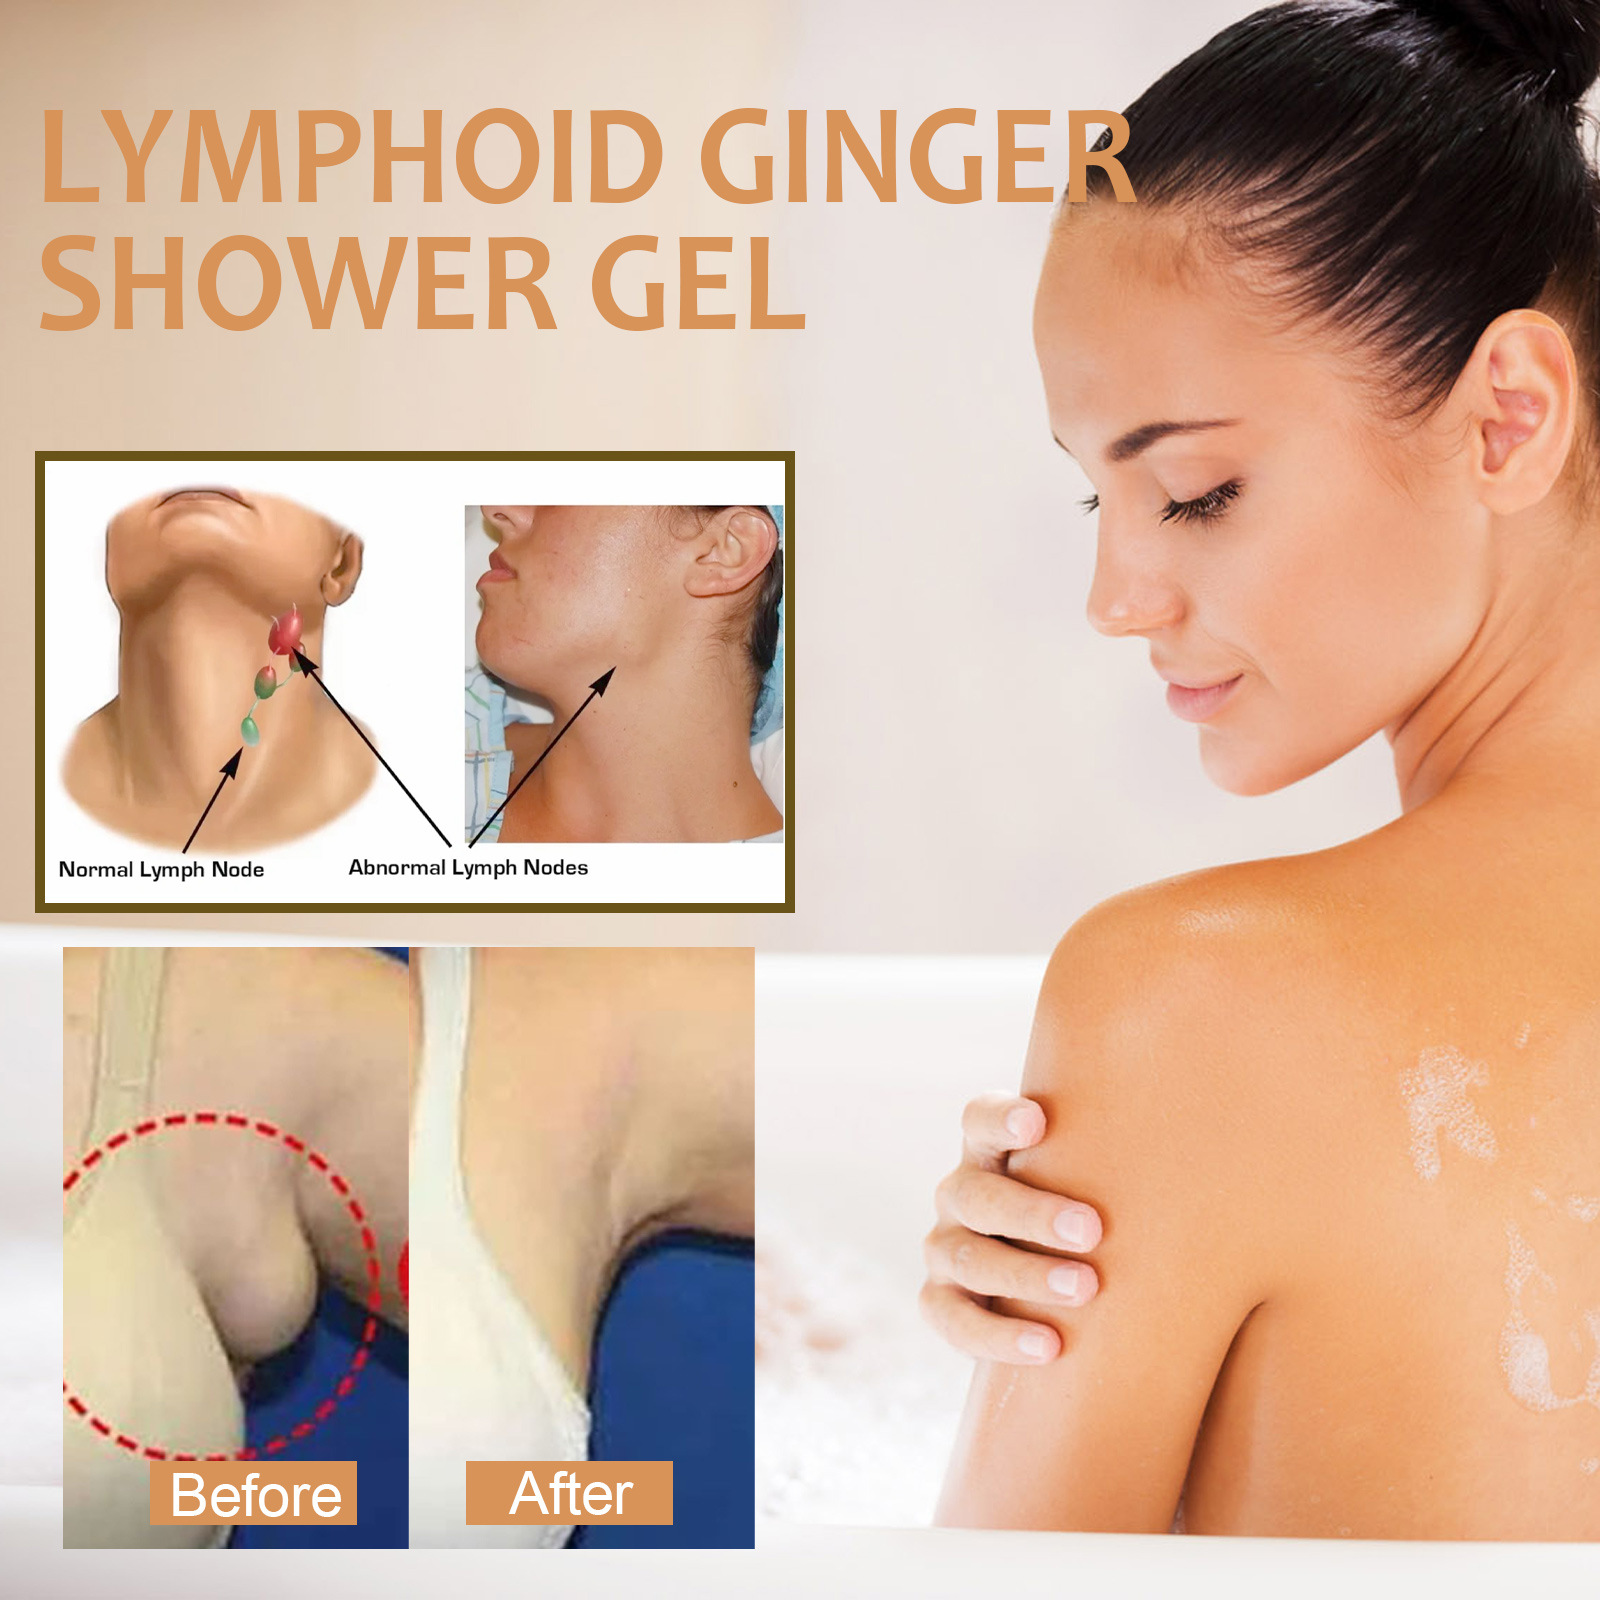 Ginger Lymphatic Body Sculpting Body Wash Cleansing And Dredging Relieves Lymphatic Swelling, Slimming And Firming The Skin